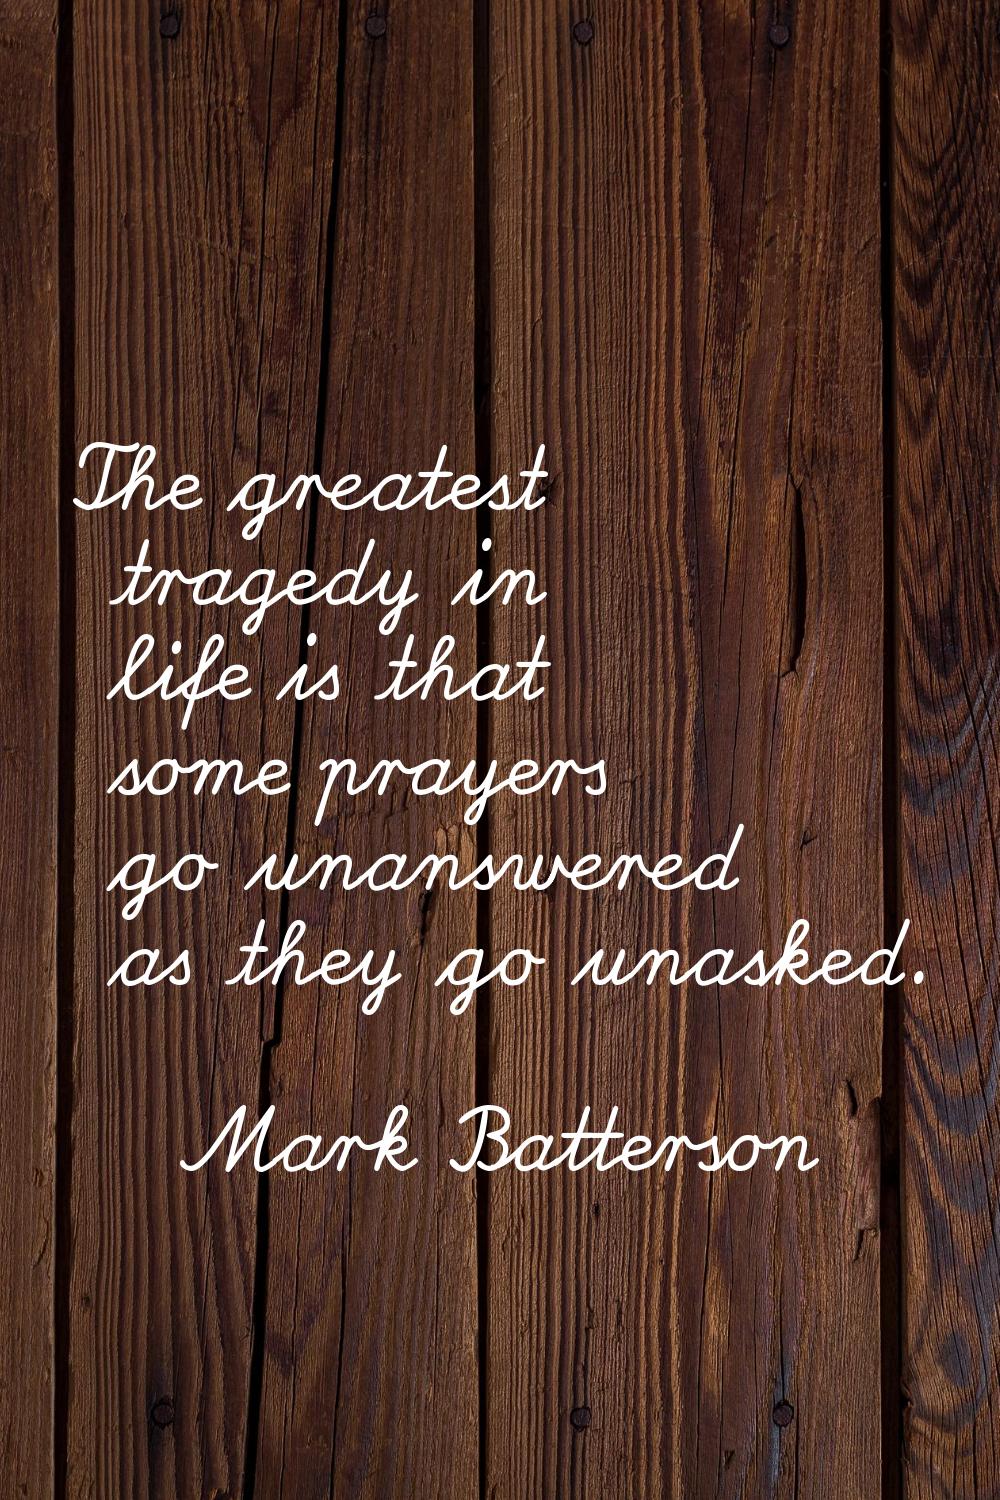 The greatest tragedy in life is that some prayers go unanswered as they go unasked.